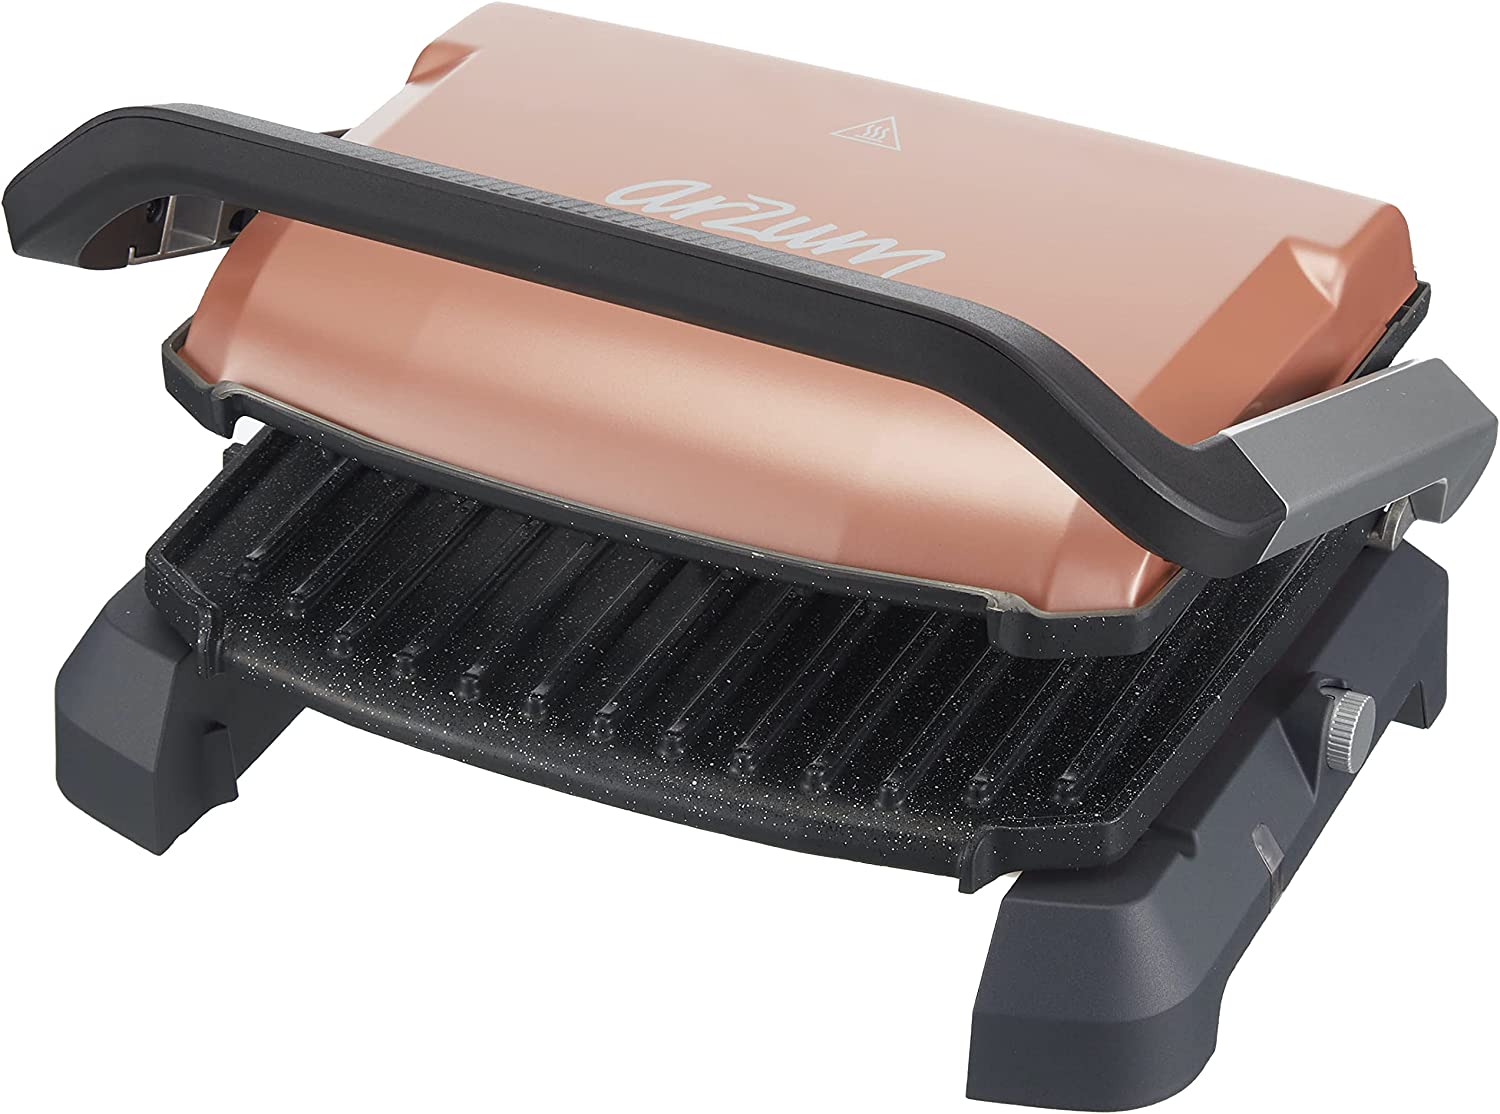 Arzum AR2053-G Toaster Fit Grill and Toaster Sunset